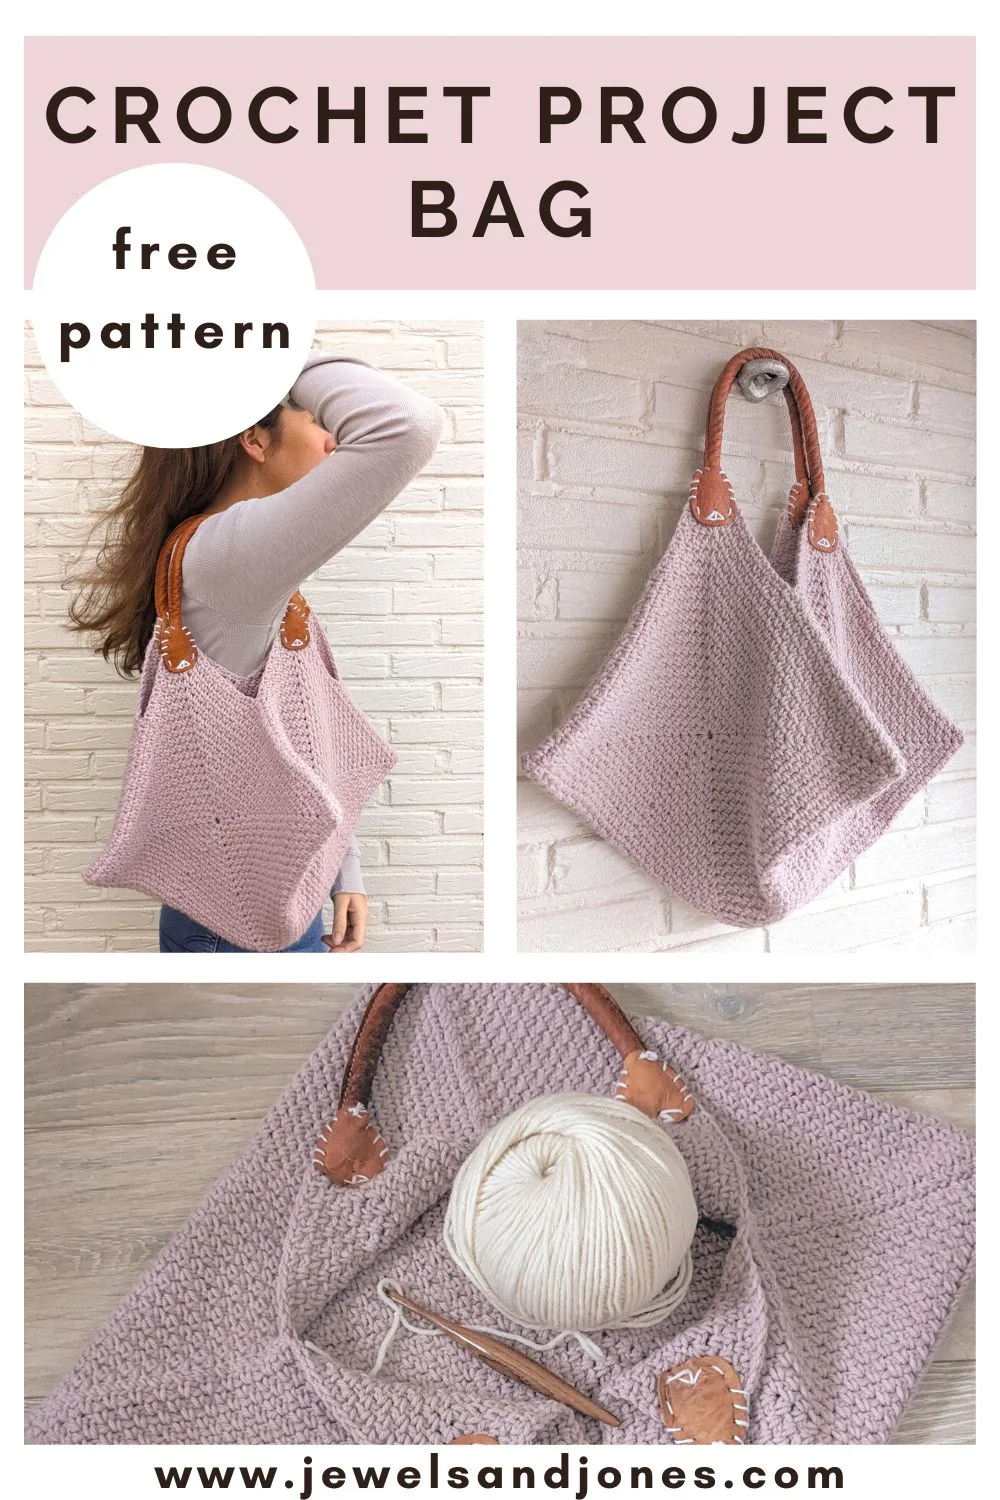 A free crochet project bag pattern made from granny squares.